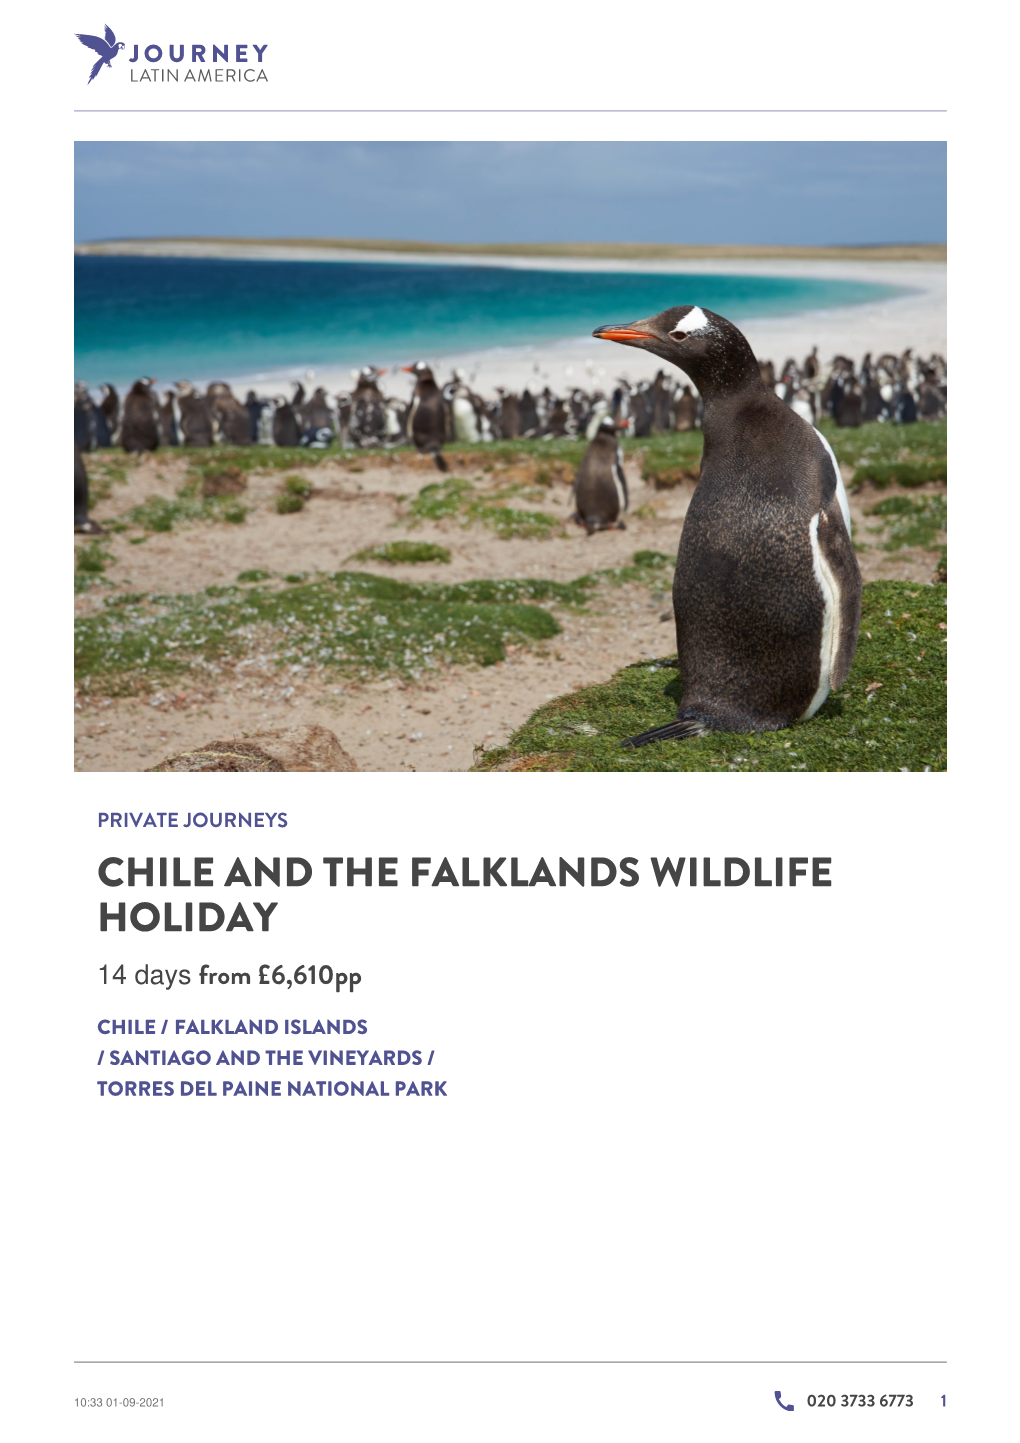 Chile and the Falklands Wildlife Holiday